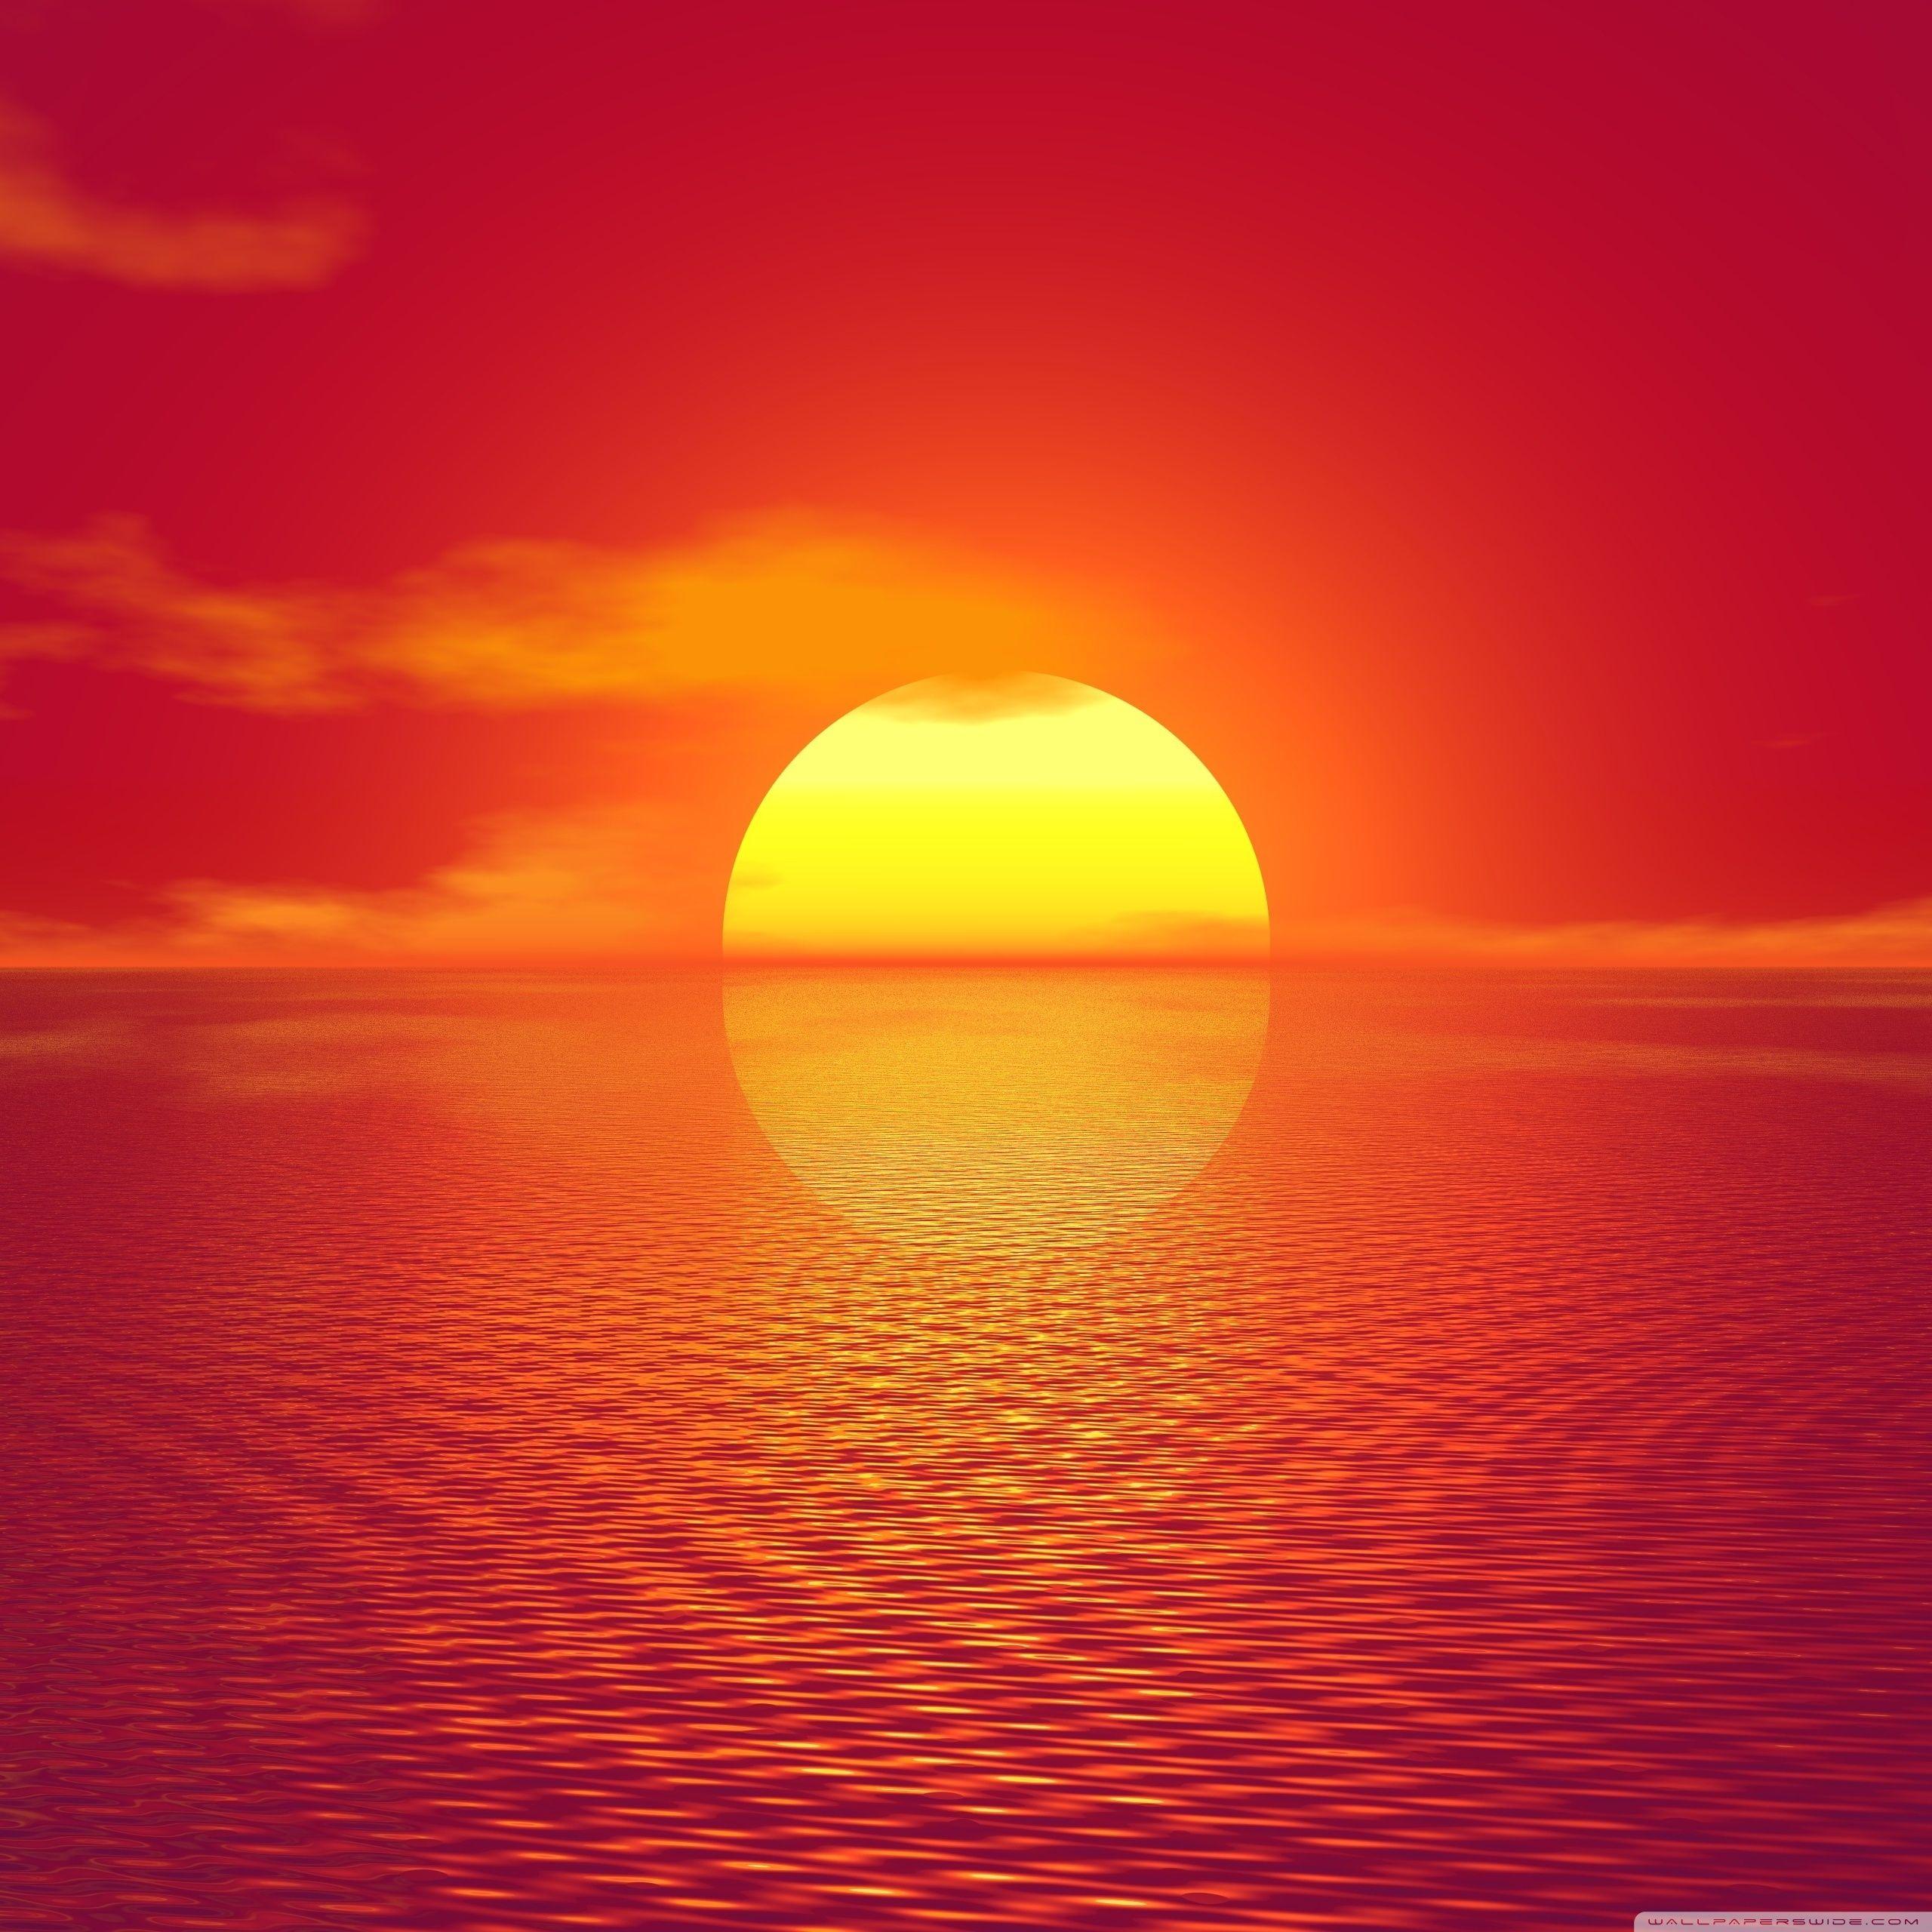 Collection 103+ Images ocean with red sky wallpaper 4k Completed